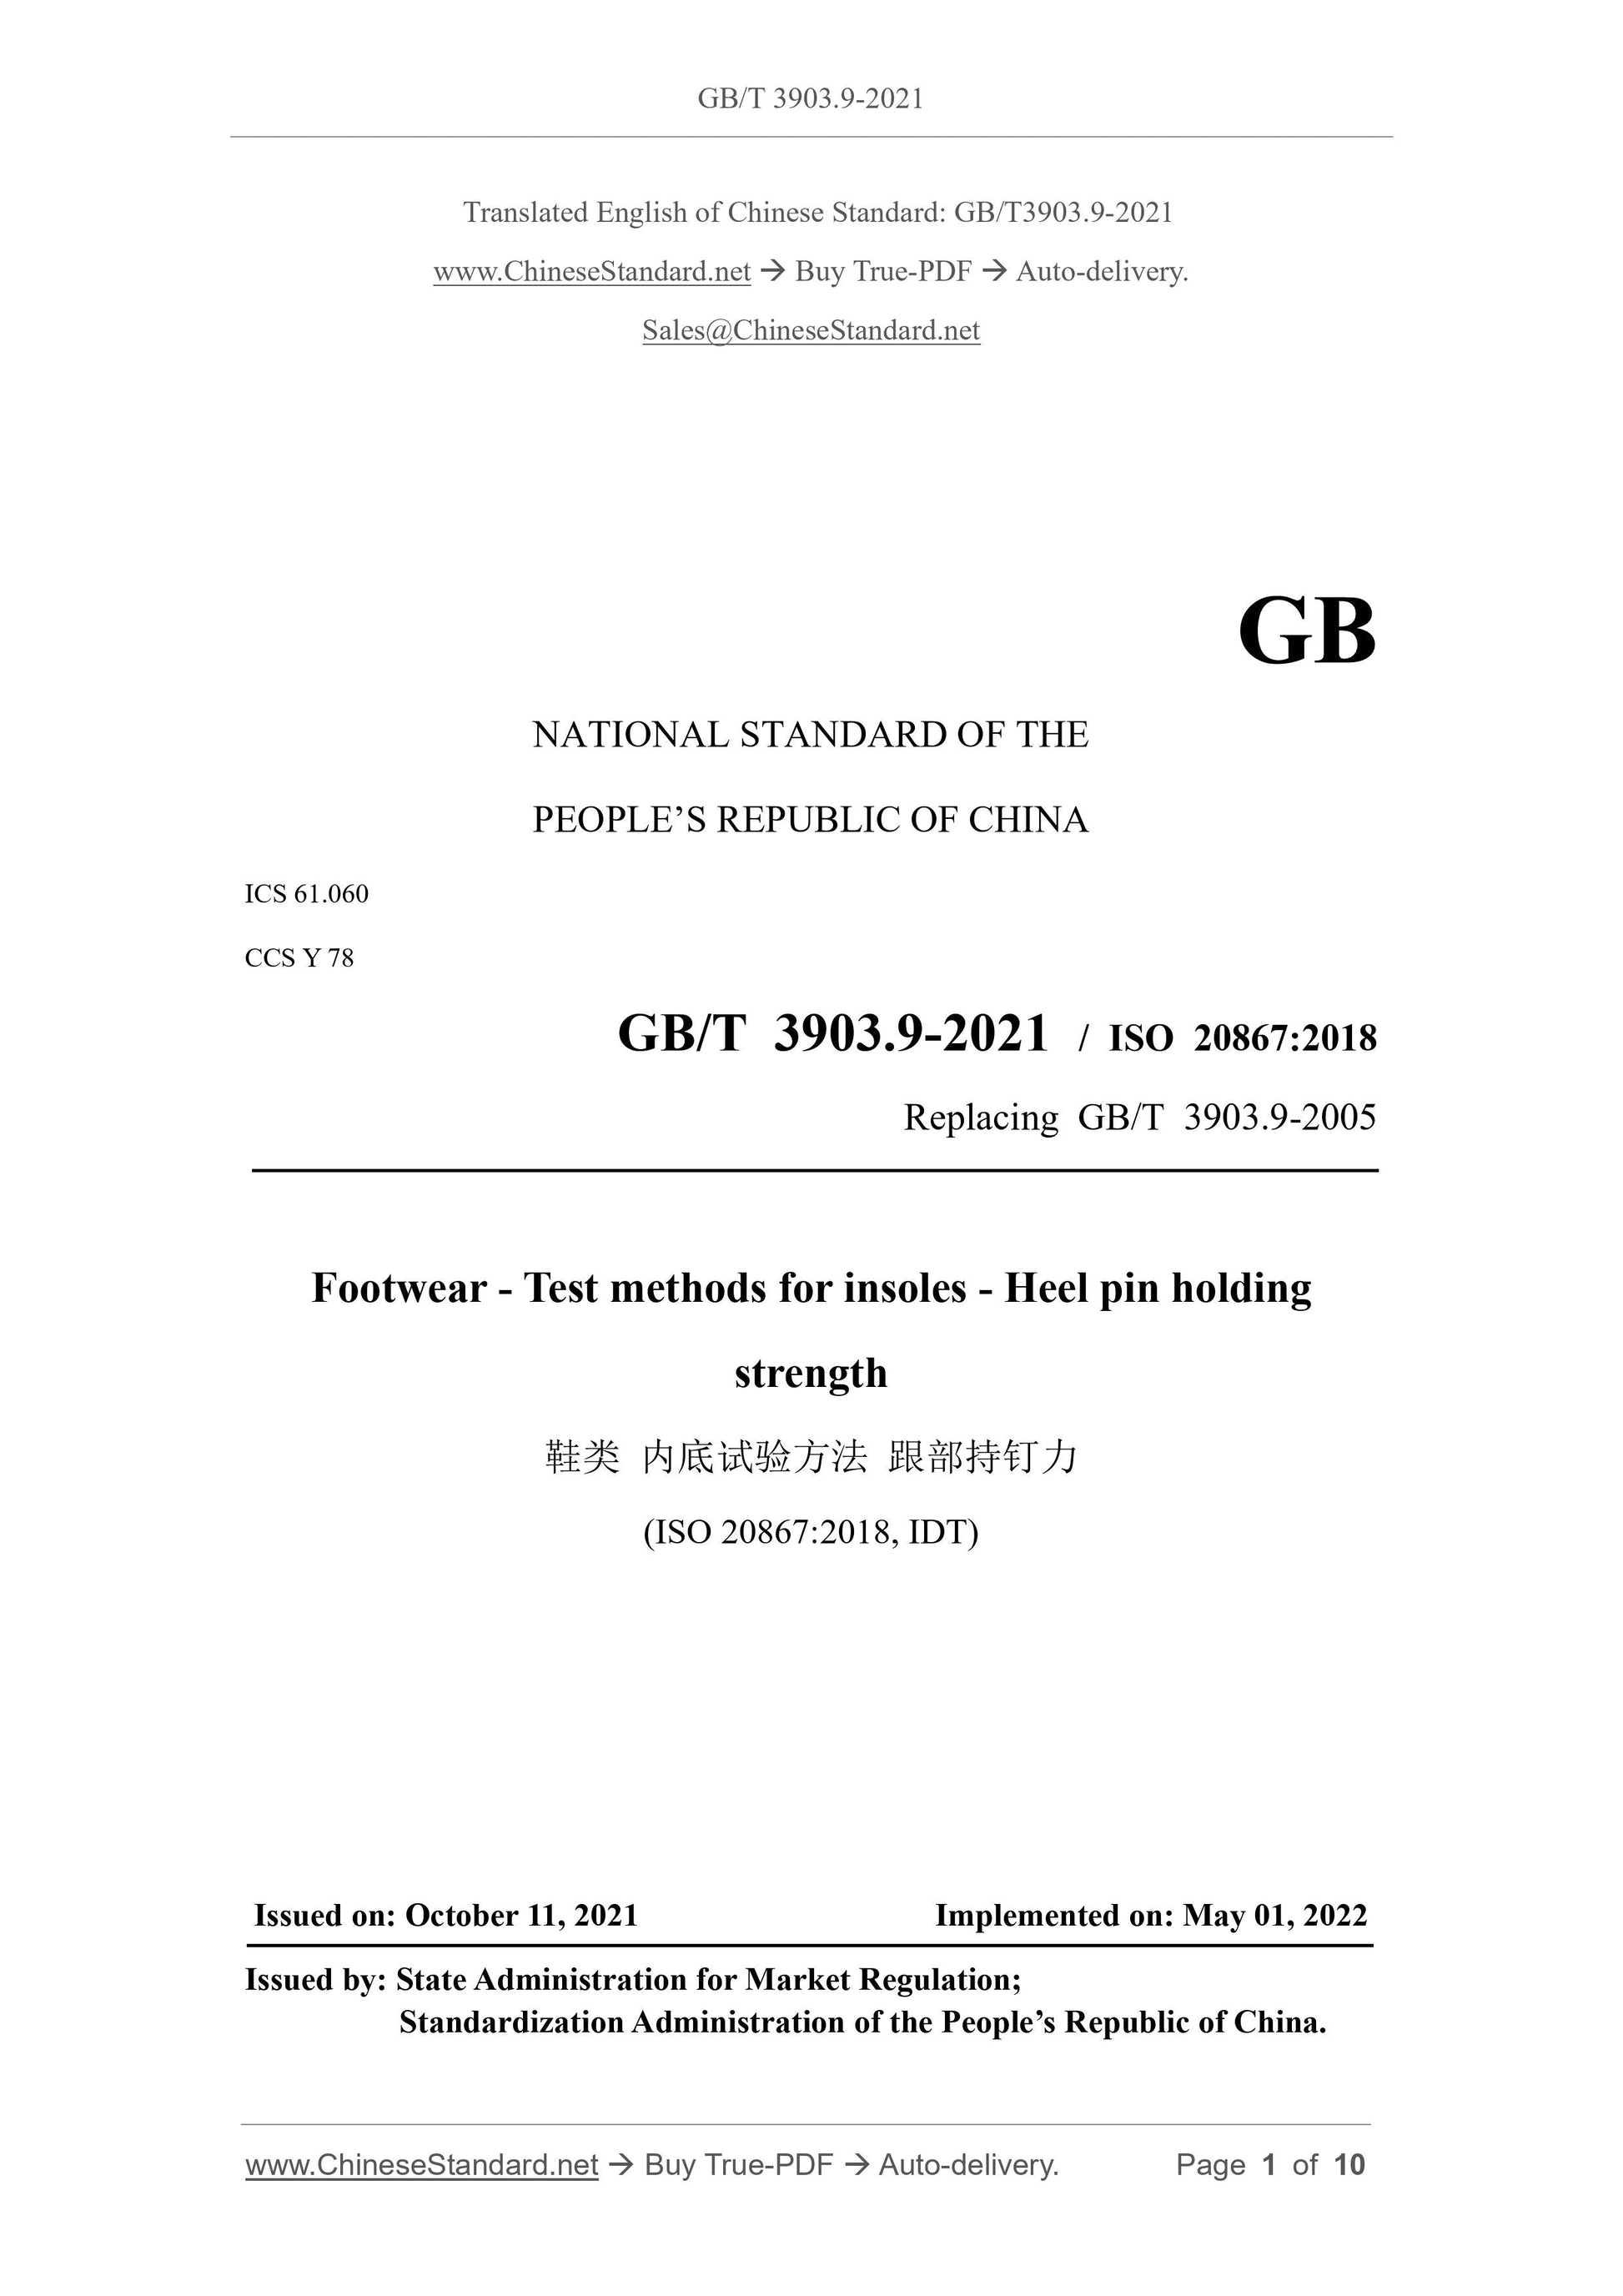 GB/T 3903.9-2021 Page 1